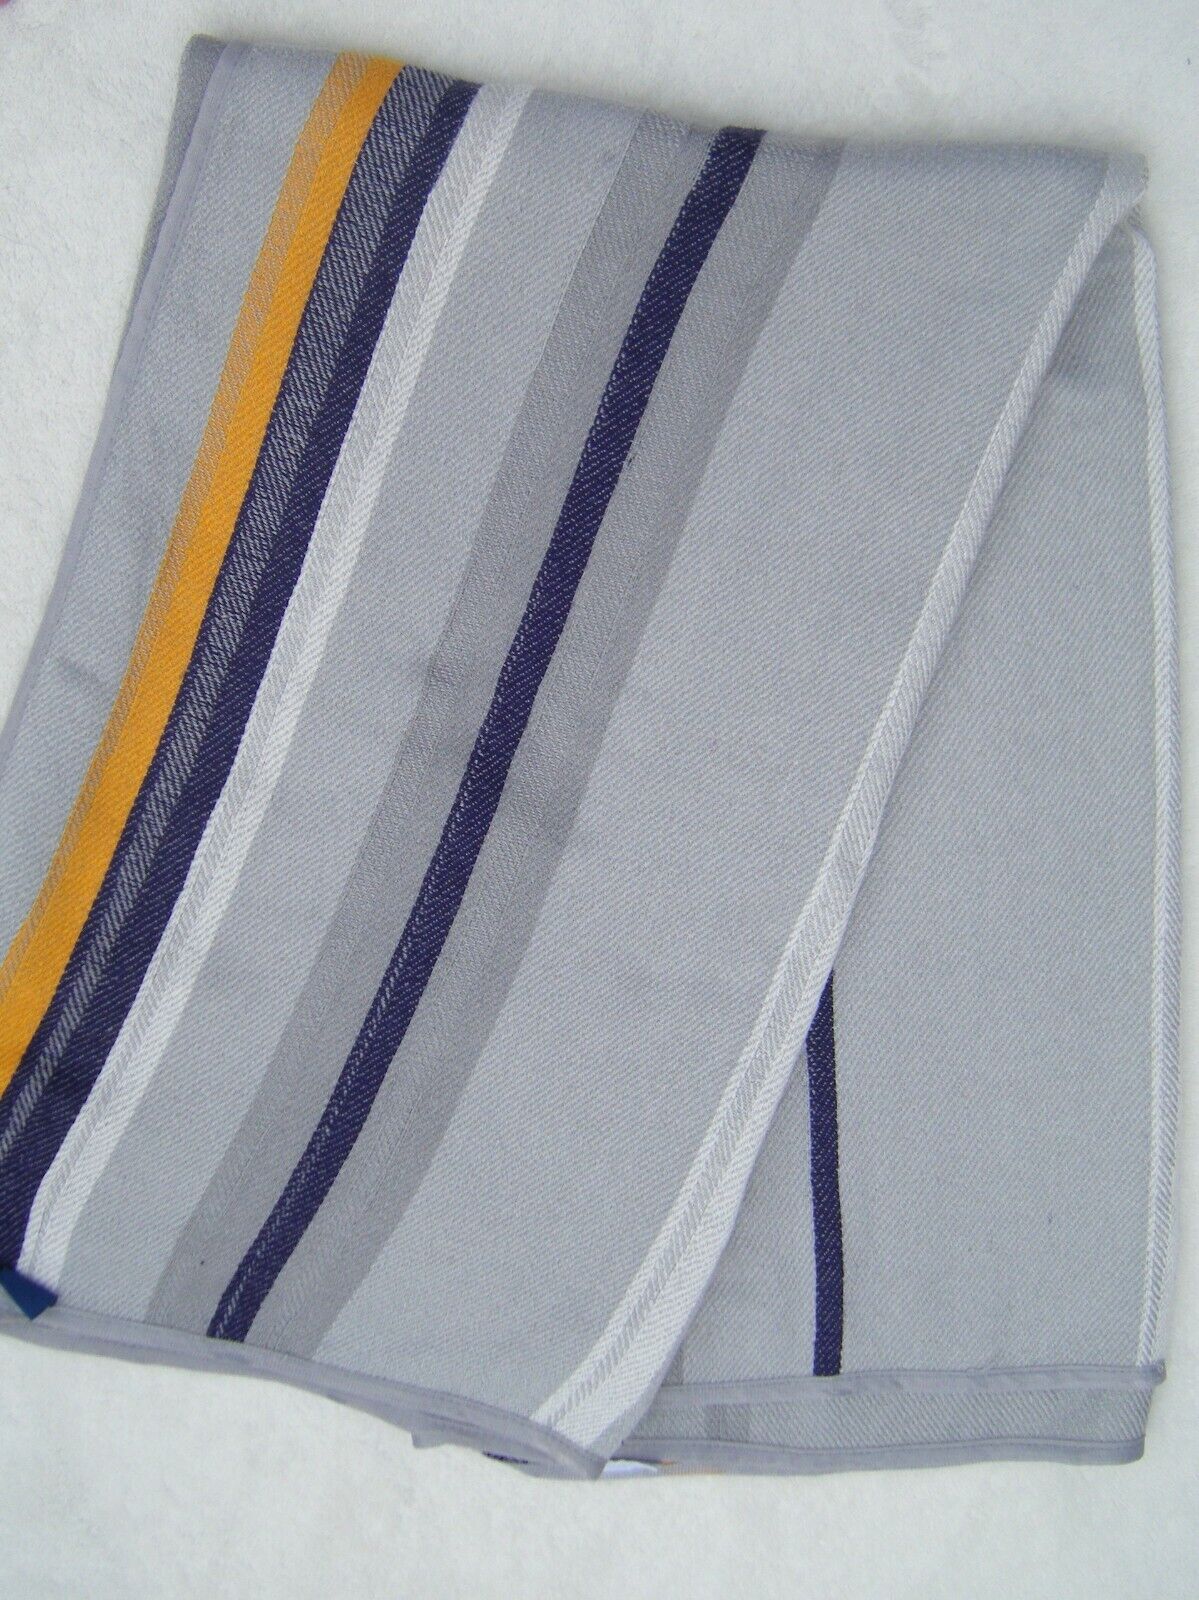 Lufthansa Airlines Gray Blue Yellow Striped Throw Blanket 40\